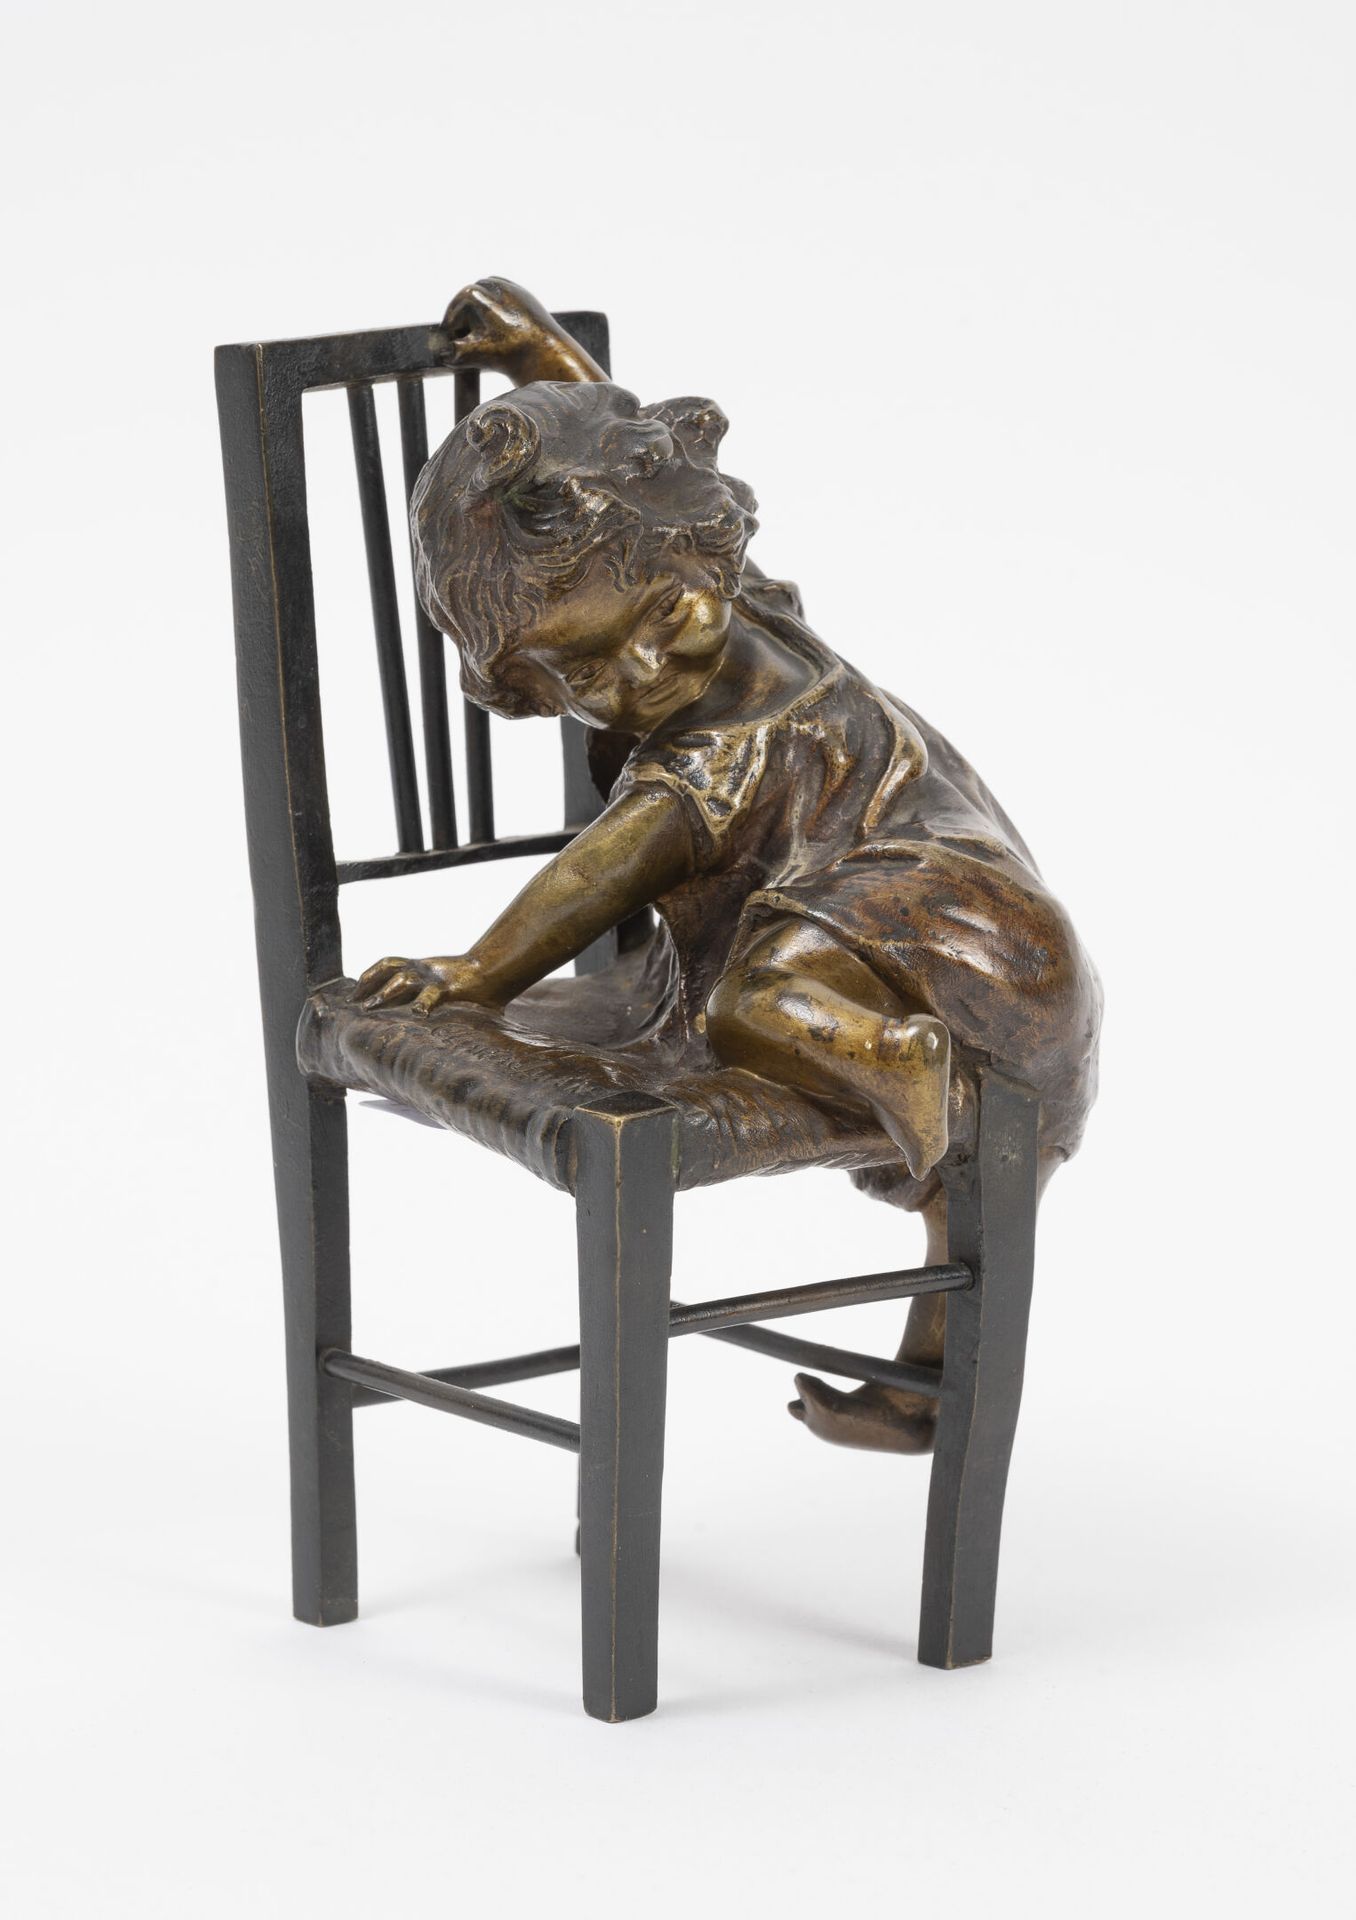 Juan CLARA AYATS (1875-1958) Girl with a chair.
Proof in bronze with a nuanced m&hellip;